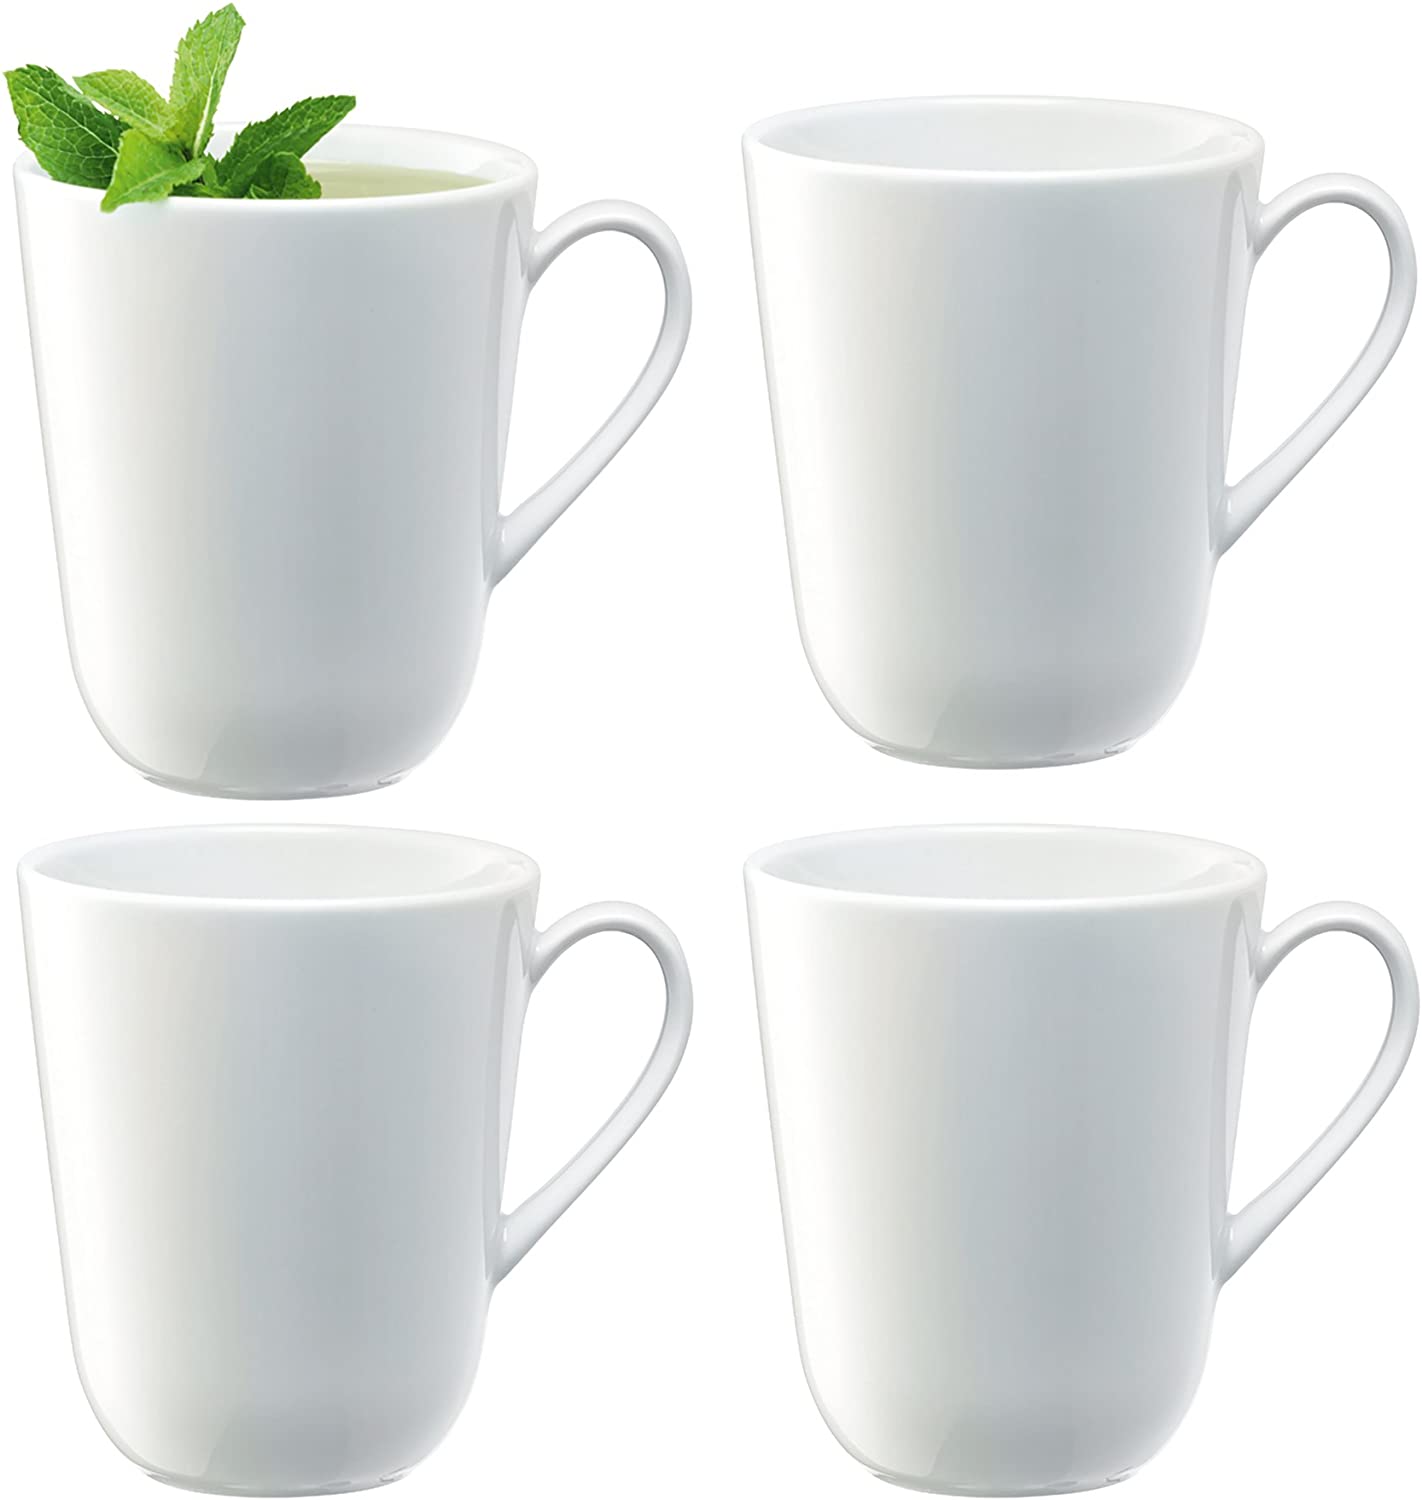 LSA International Curved Dine Cup, White, 0.38 Litres, Set of 4